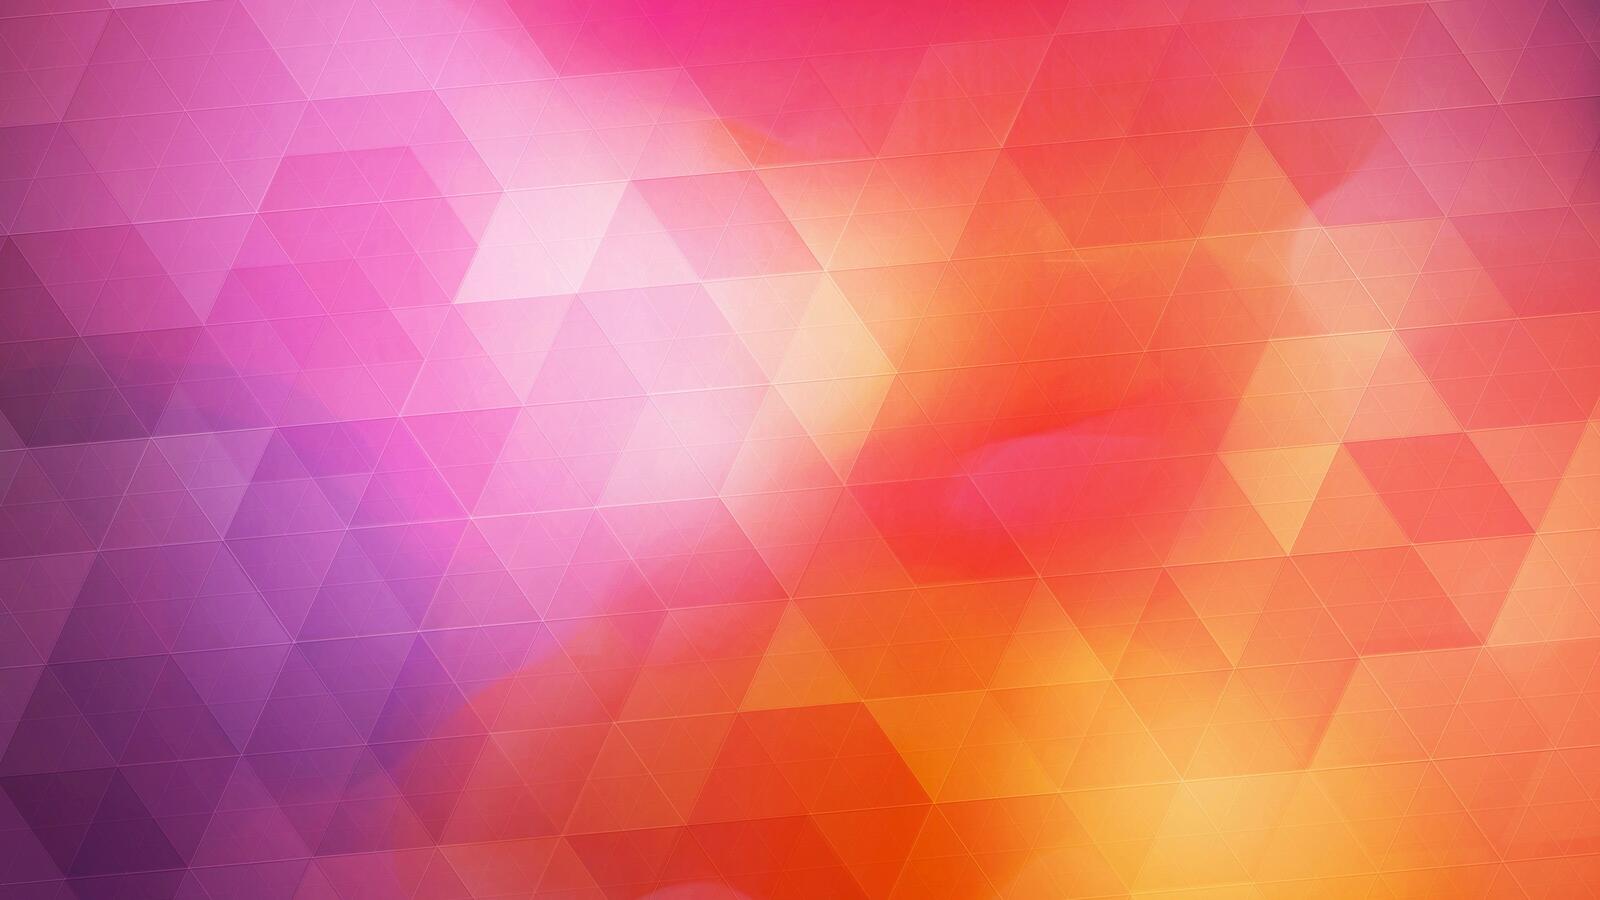 Wallpapers gradient low poly triangles color blend on the desktop